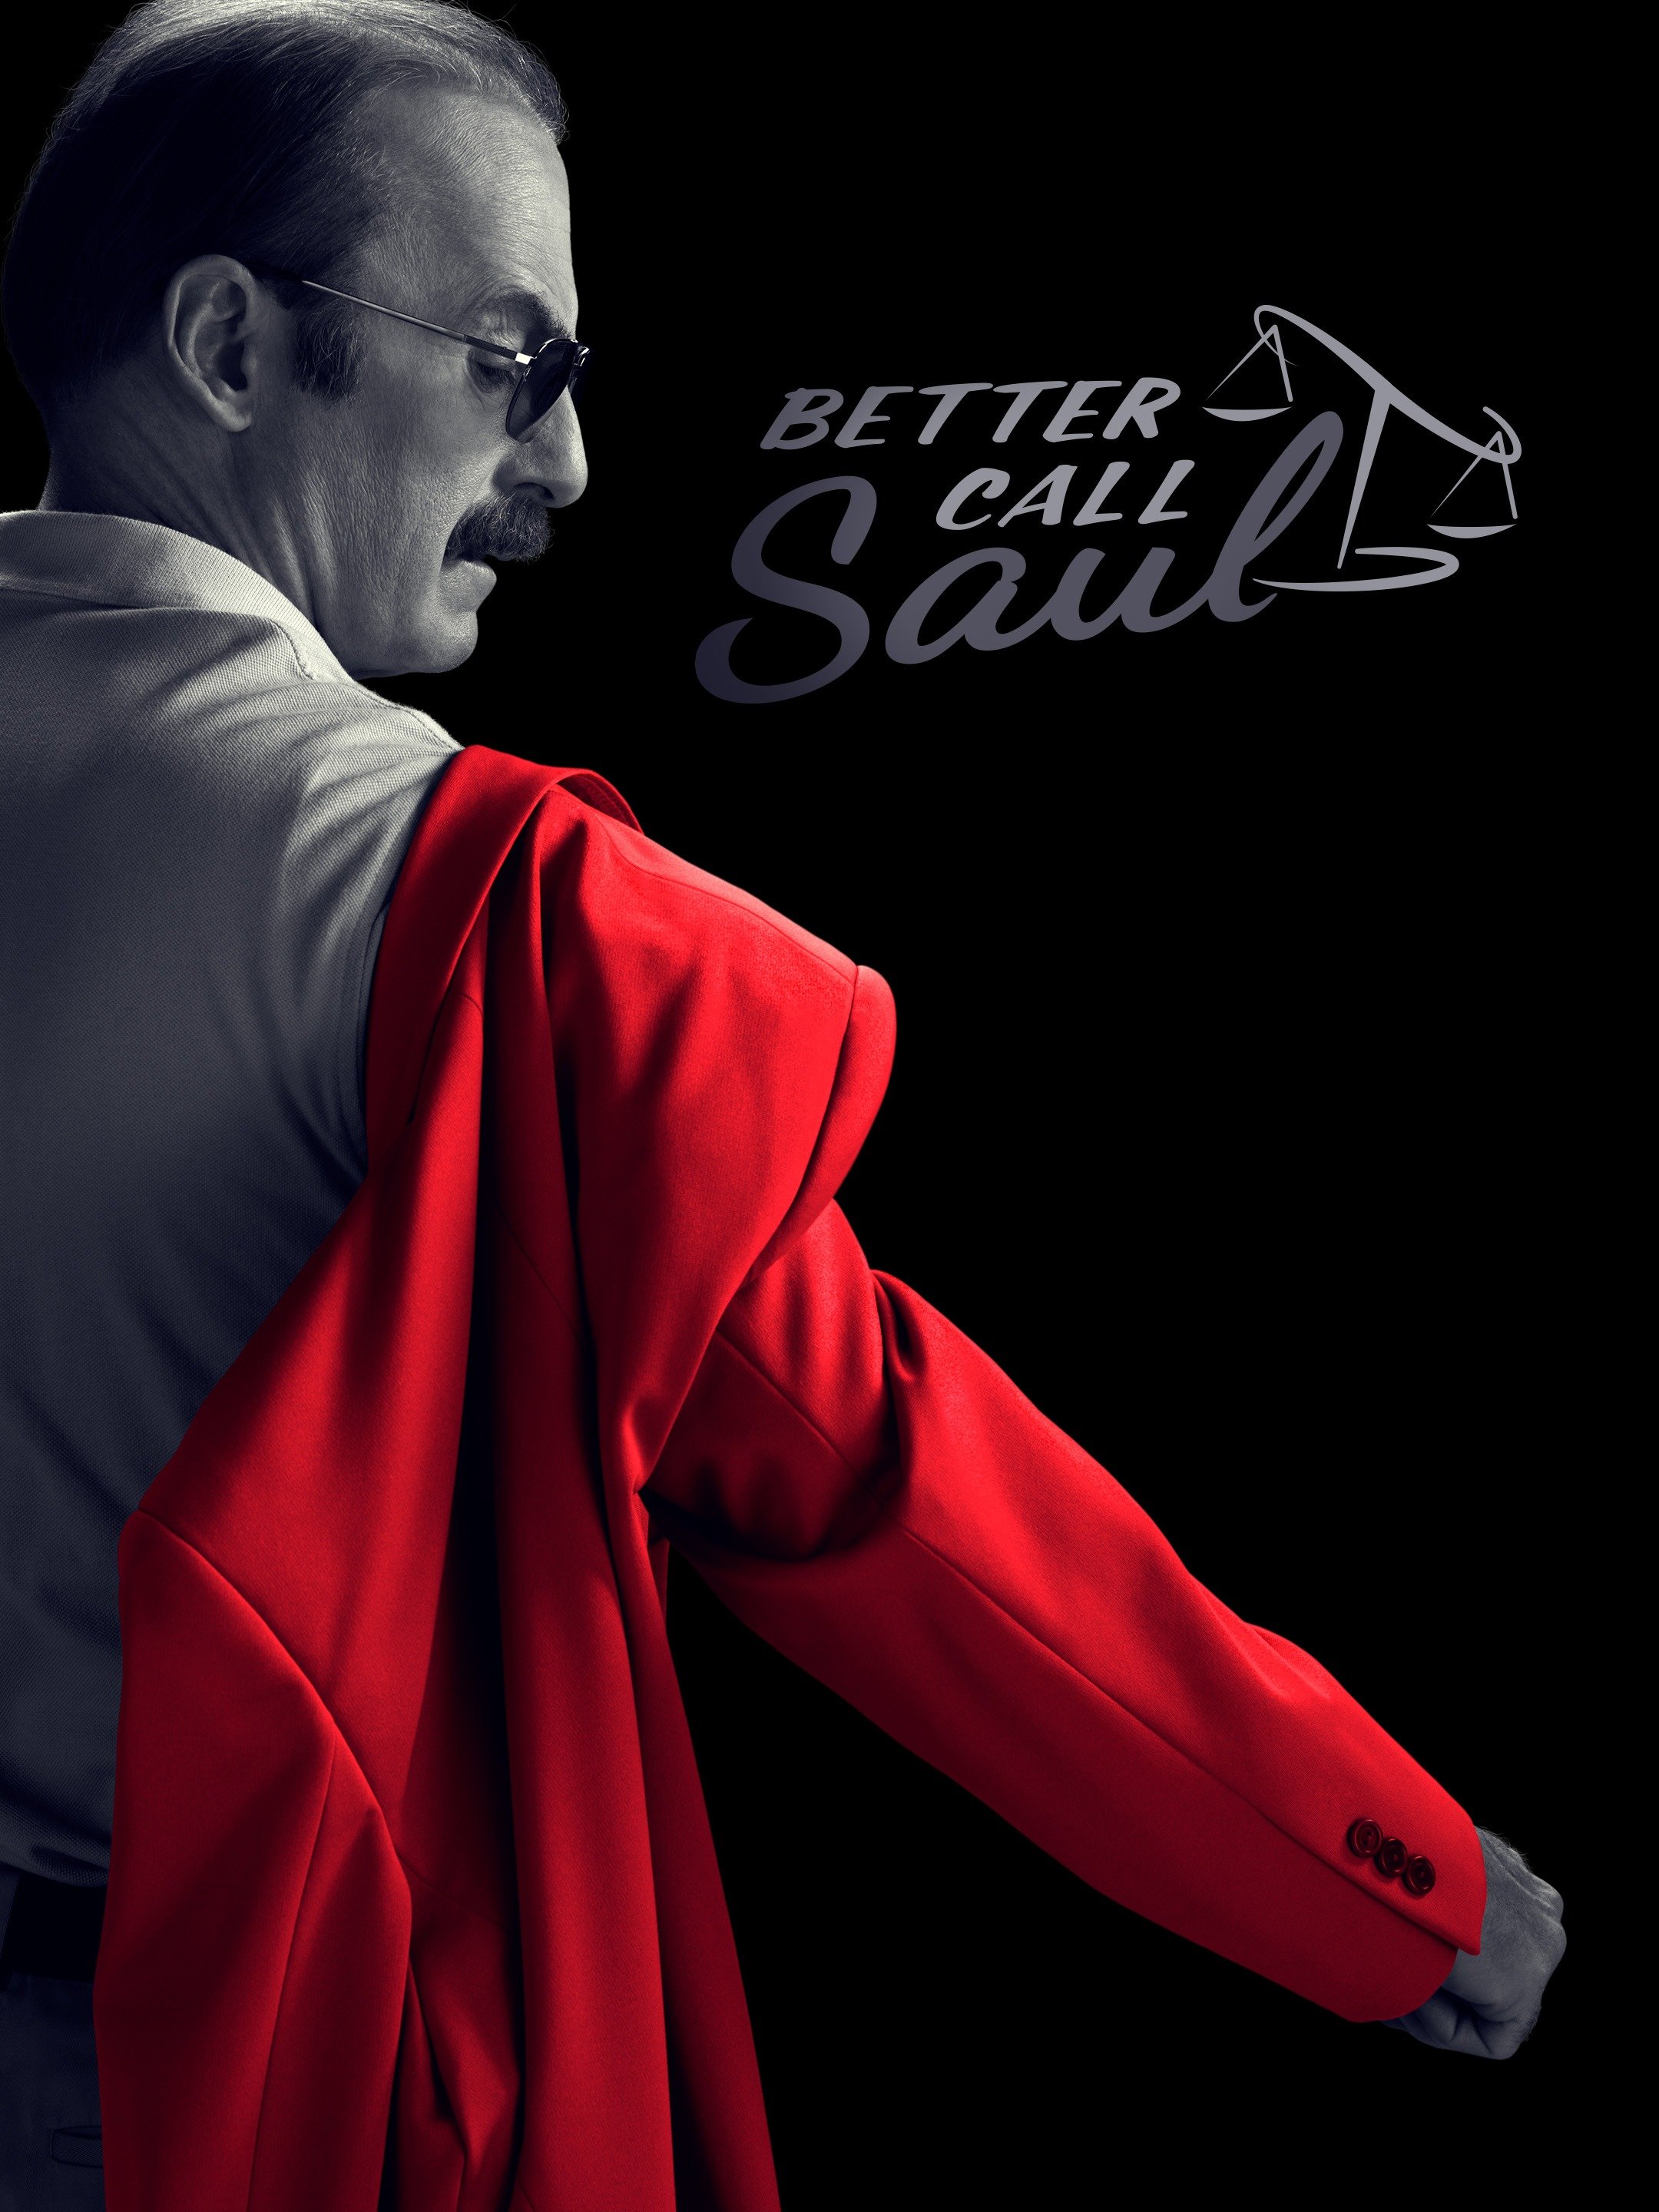 What are the trials and tribulations faced by criminal lawyer Jimmy McGill in Better Call Saul?

